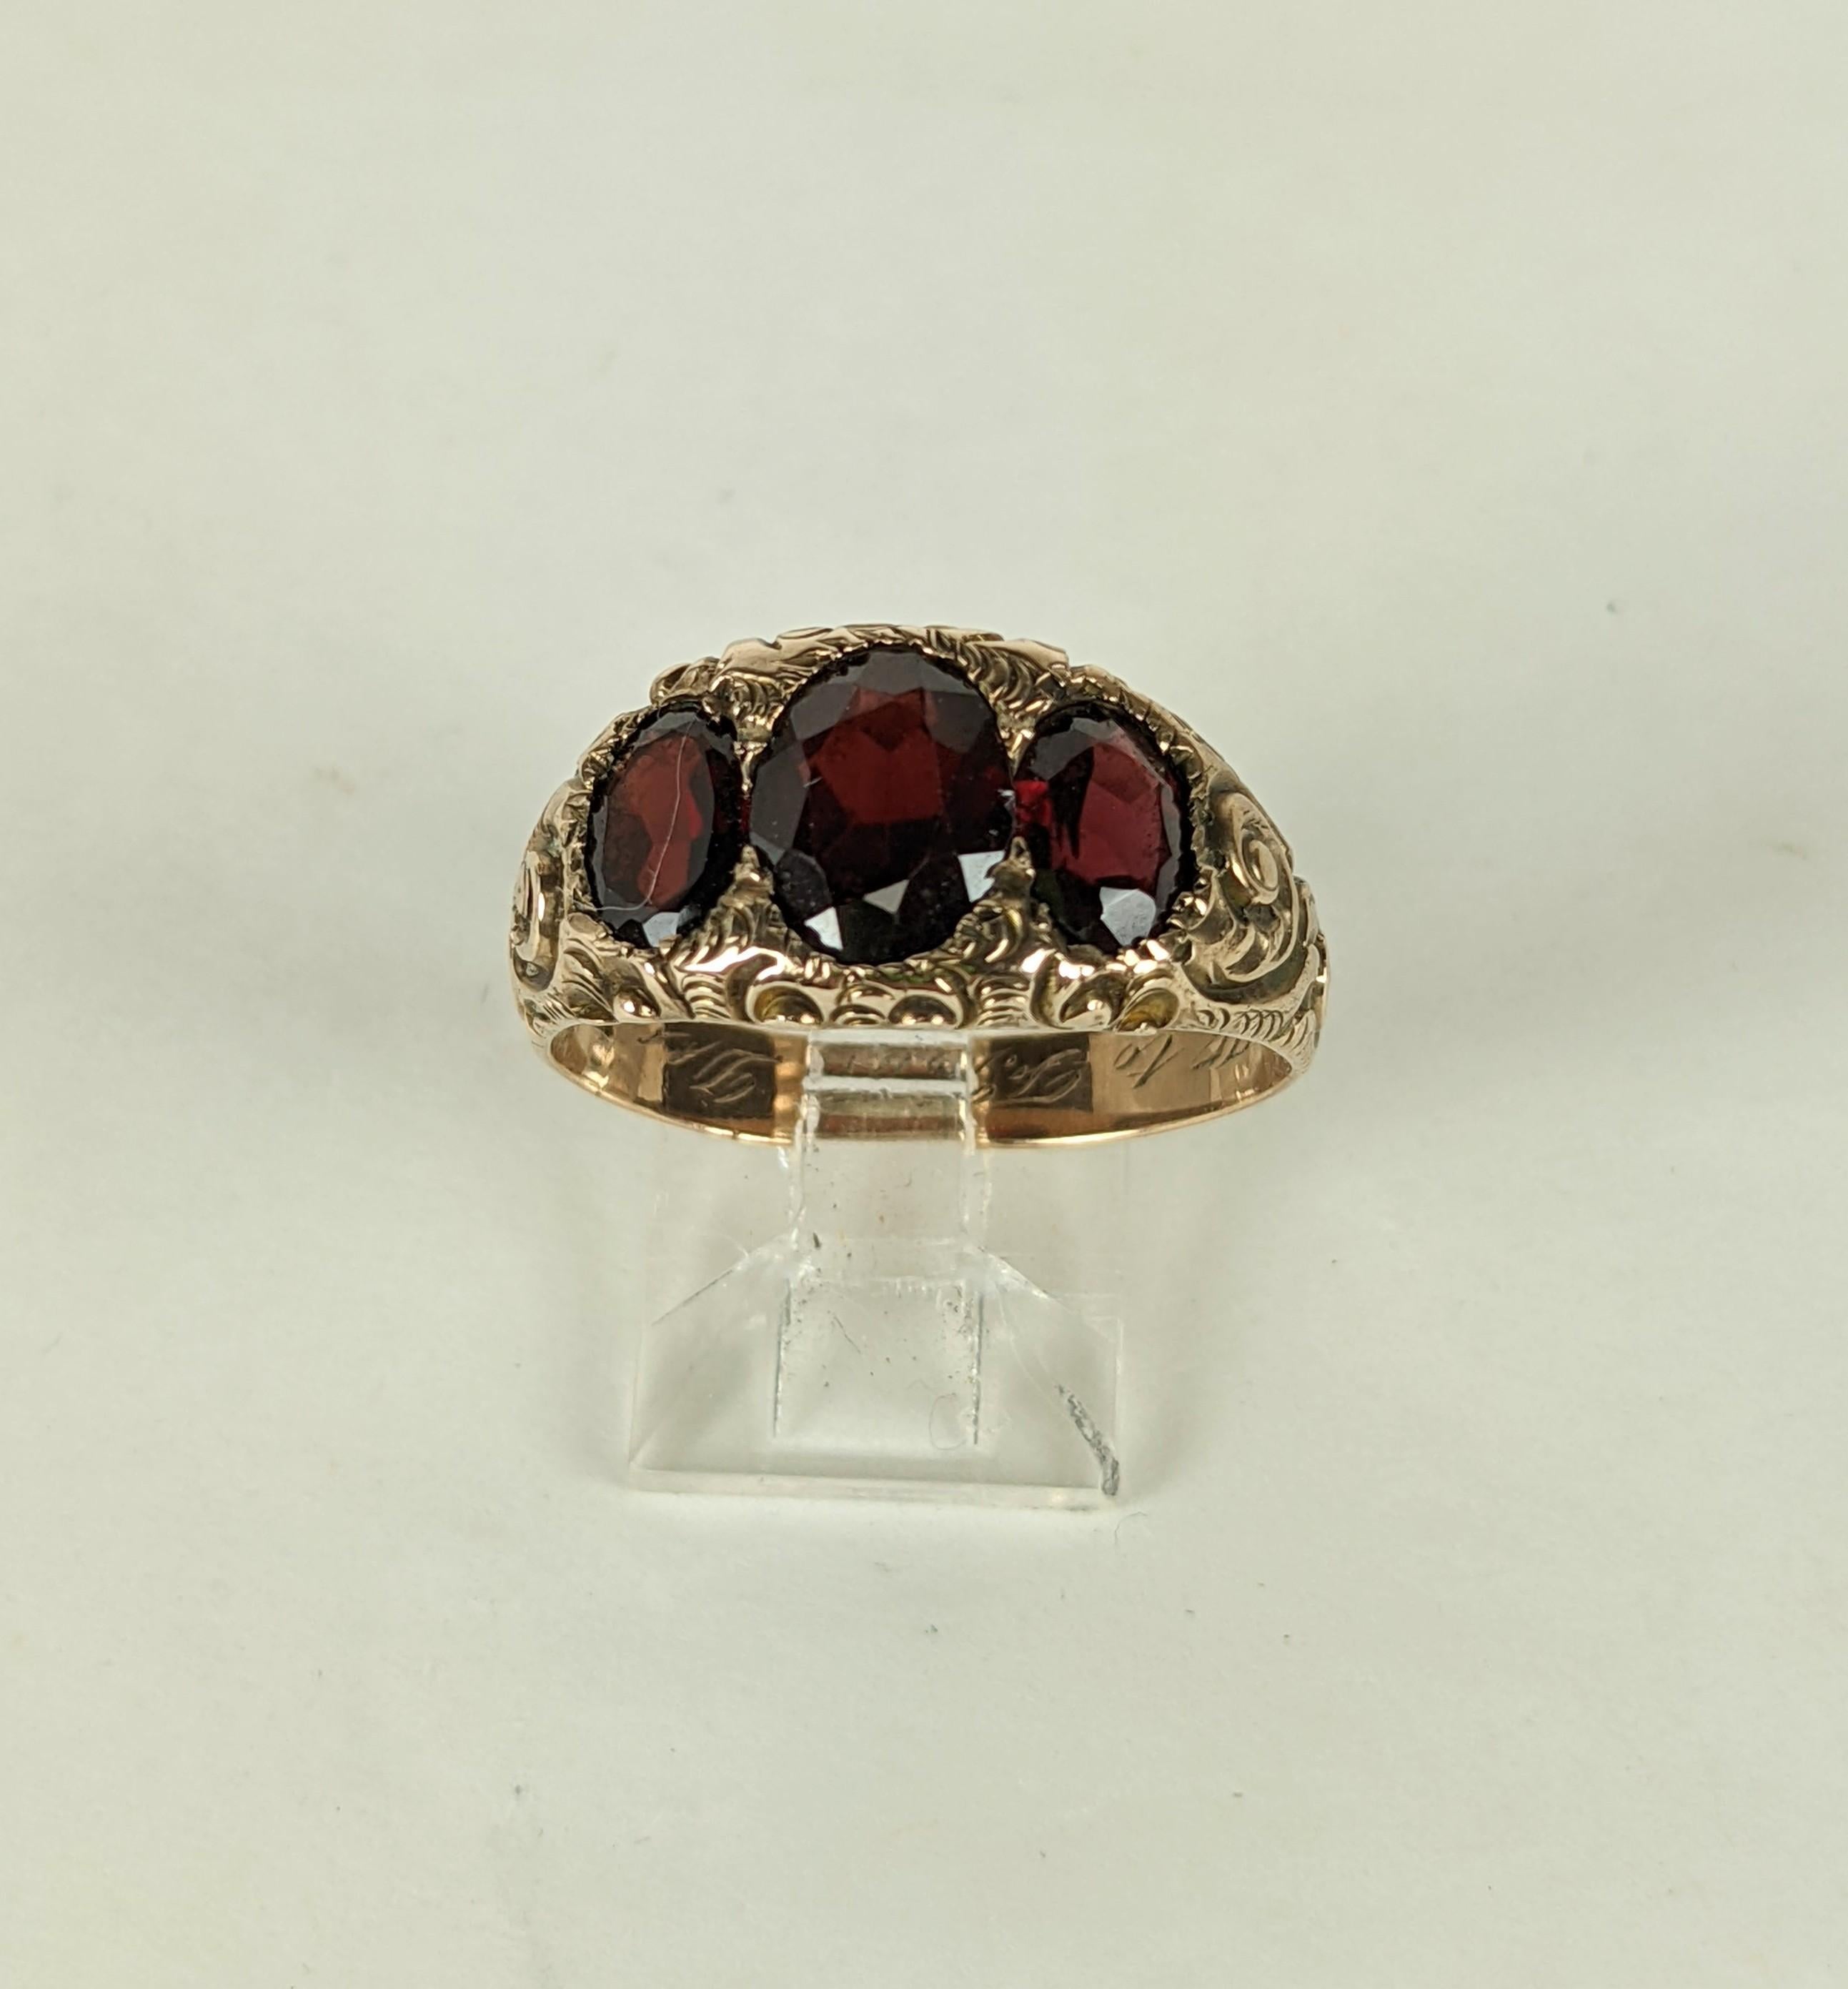 Attractive Victorian Garnet 3 Stone Ring mid 19th C in 14k gold. Oval cut garnets are set into an elaborate hand etched scroll work setting. 
Elegant and great for anyone. 1900's USA. Interior has inscribed Initials, 12-25-1915, 
Size 8.5-9. 